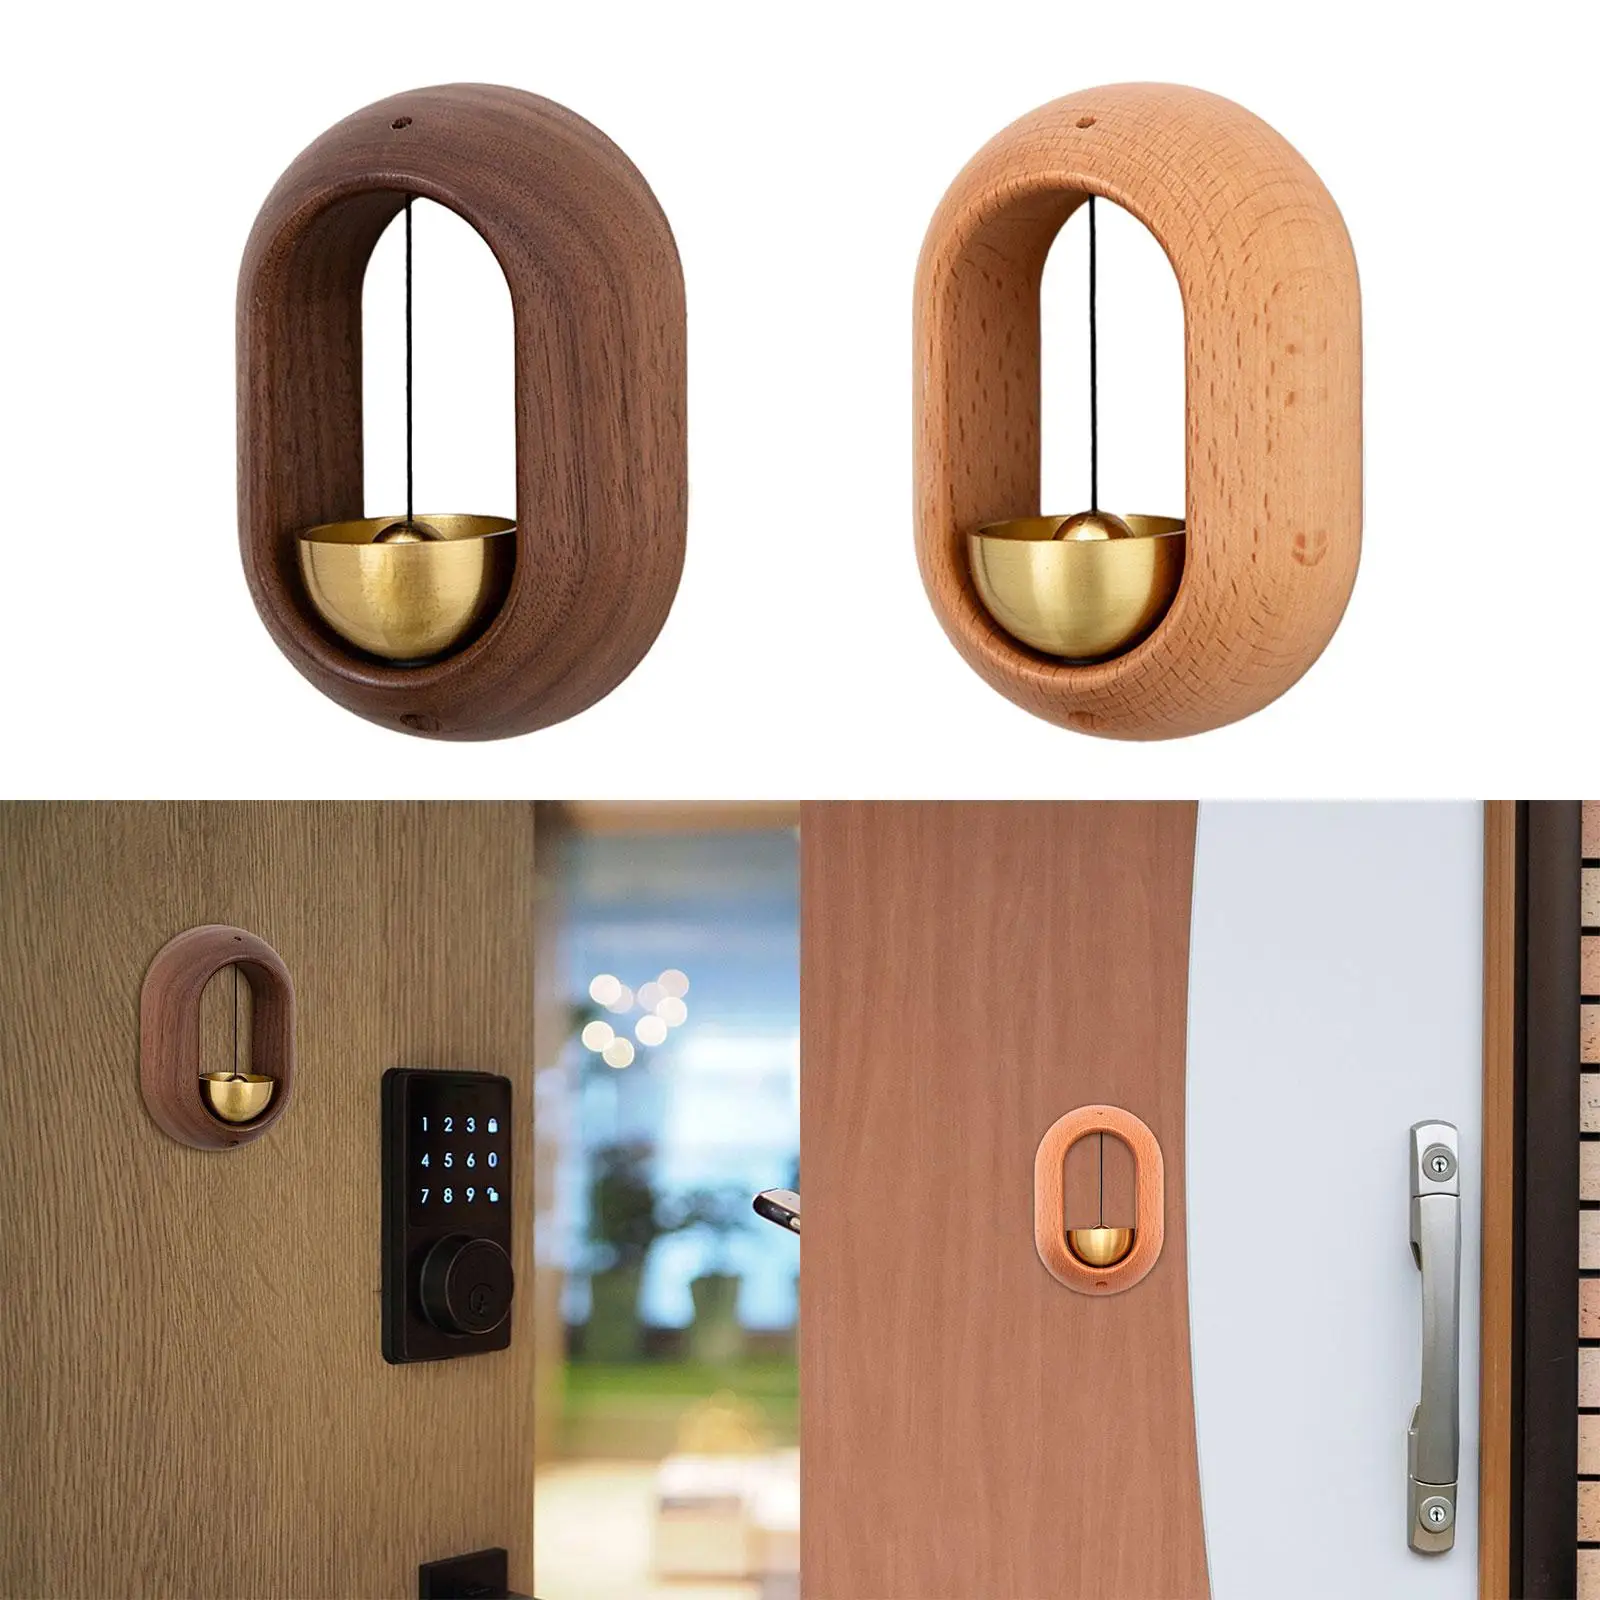 Shopkeepers Bell Japanese Style Wood Decoration Entrance Doorbells for Office Business Office Door Opening Entrance